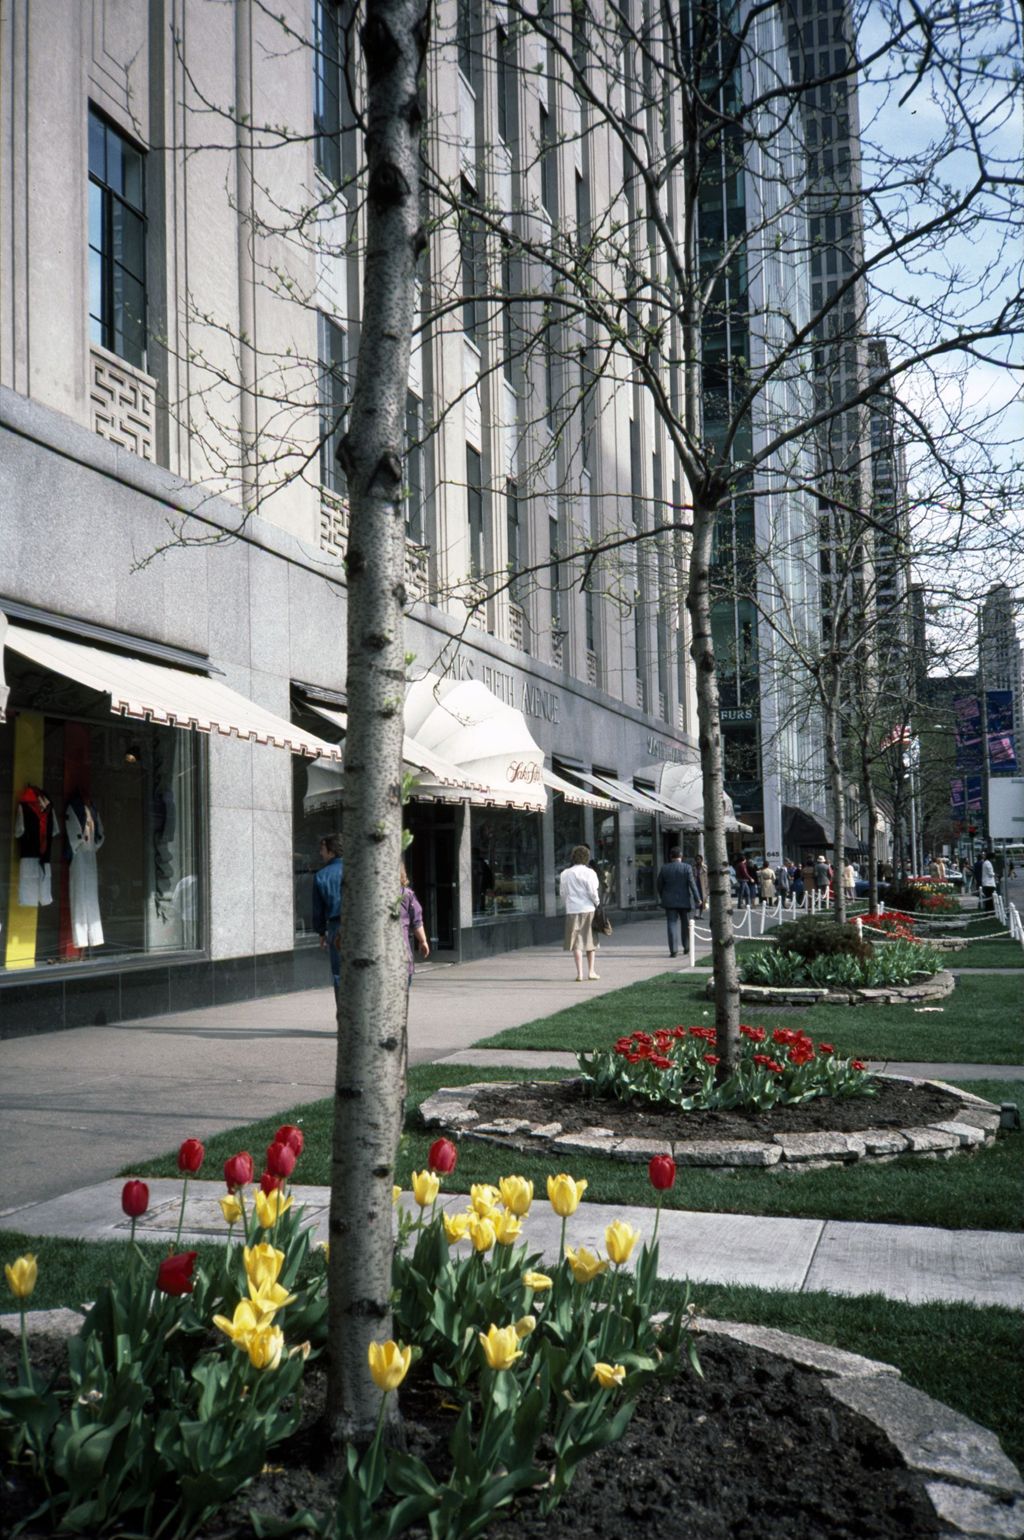 Landscaped parkway in front of Saks Fifth Avenue